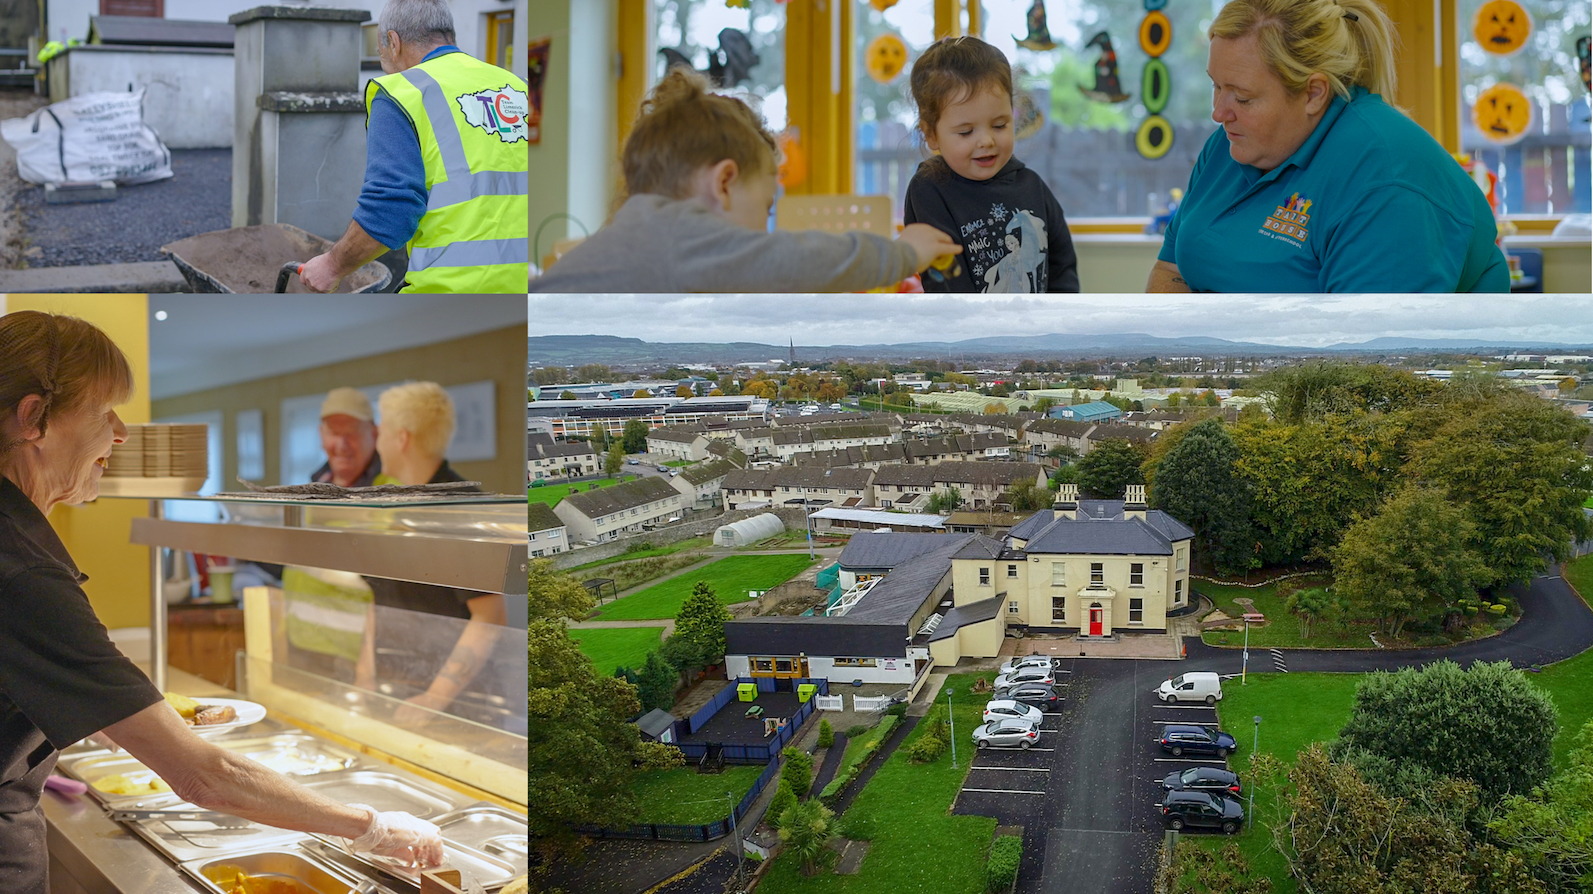 Tait House Community Enterprise creates social, environmental and economic benefits for communities in Southill and other local areas